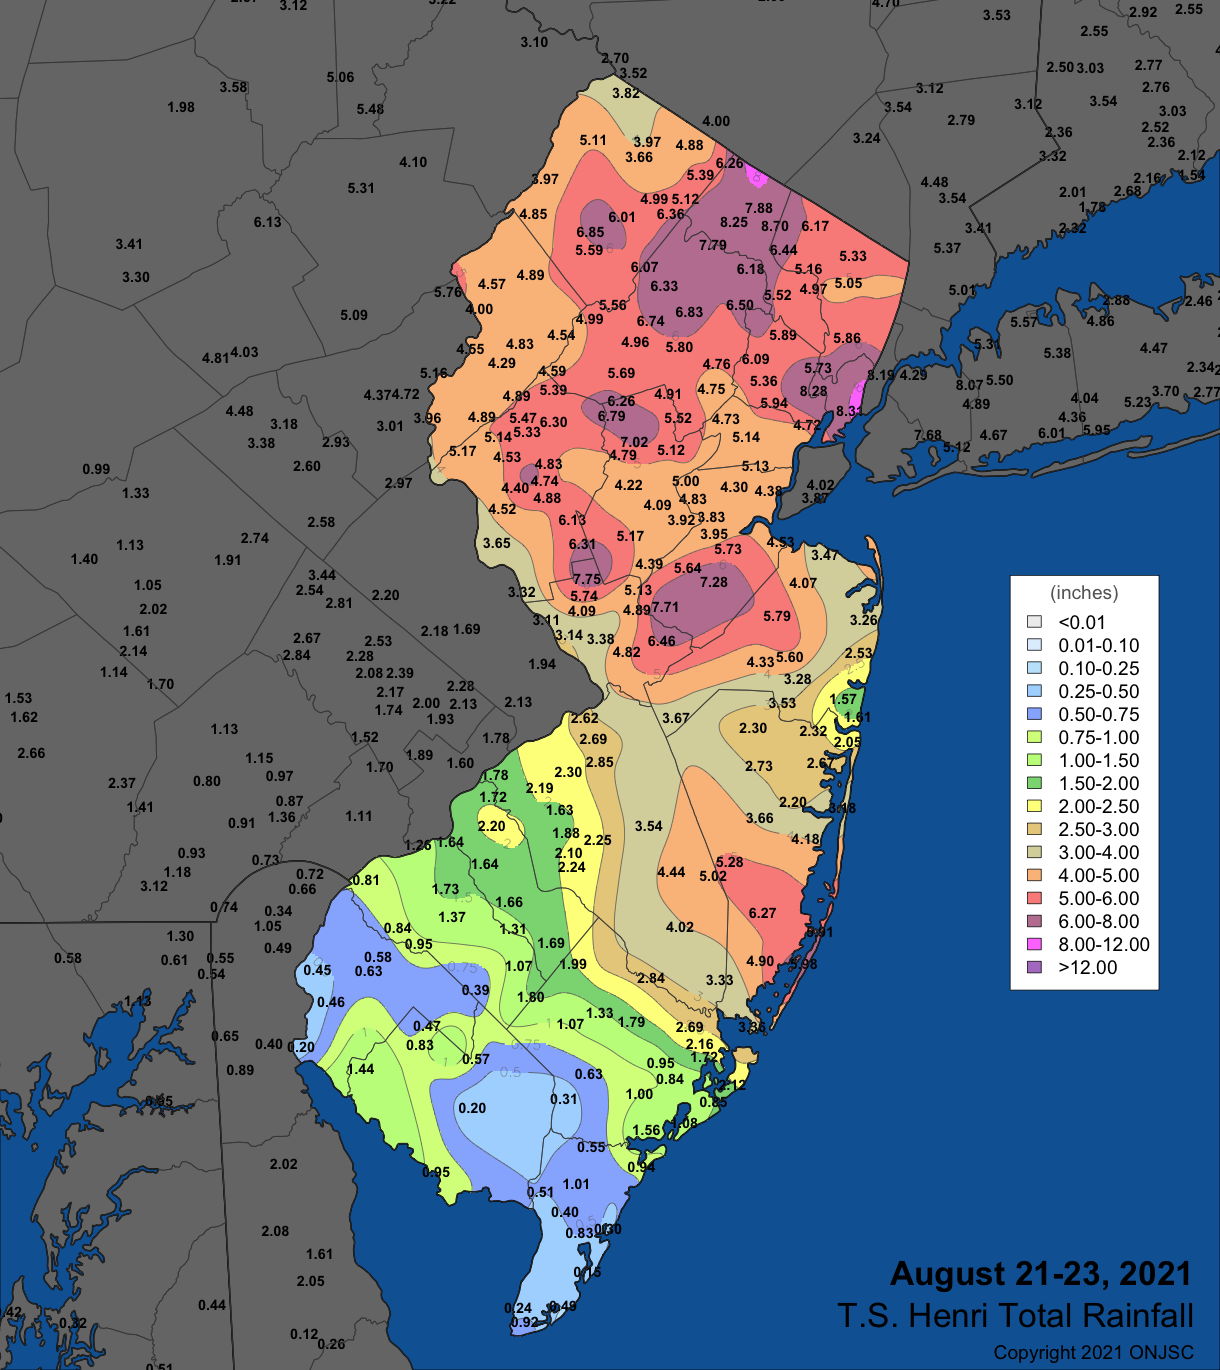 Rainfall from August 21st to 23rd based on an ONJSC analysis generated using observations from NWS Cooperative, CoCoRaHS, NJWxNet, and a few other smaller networks